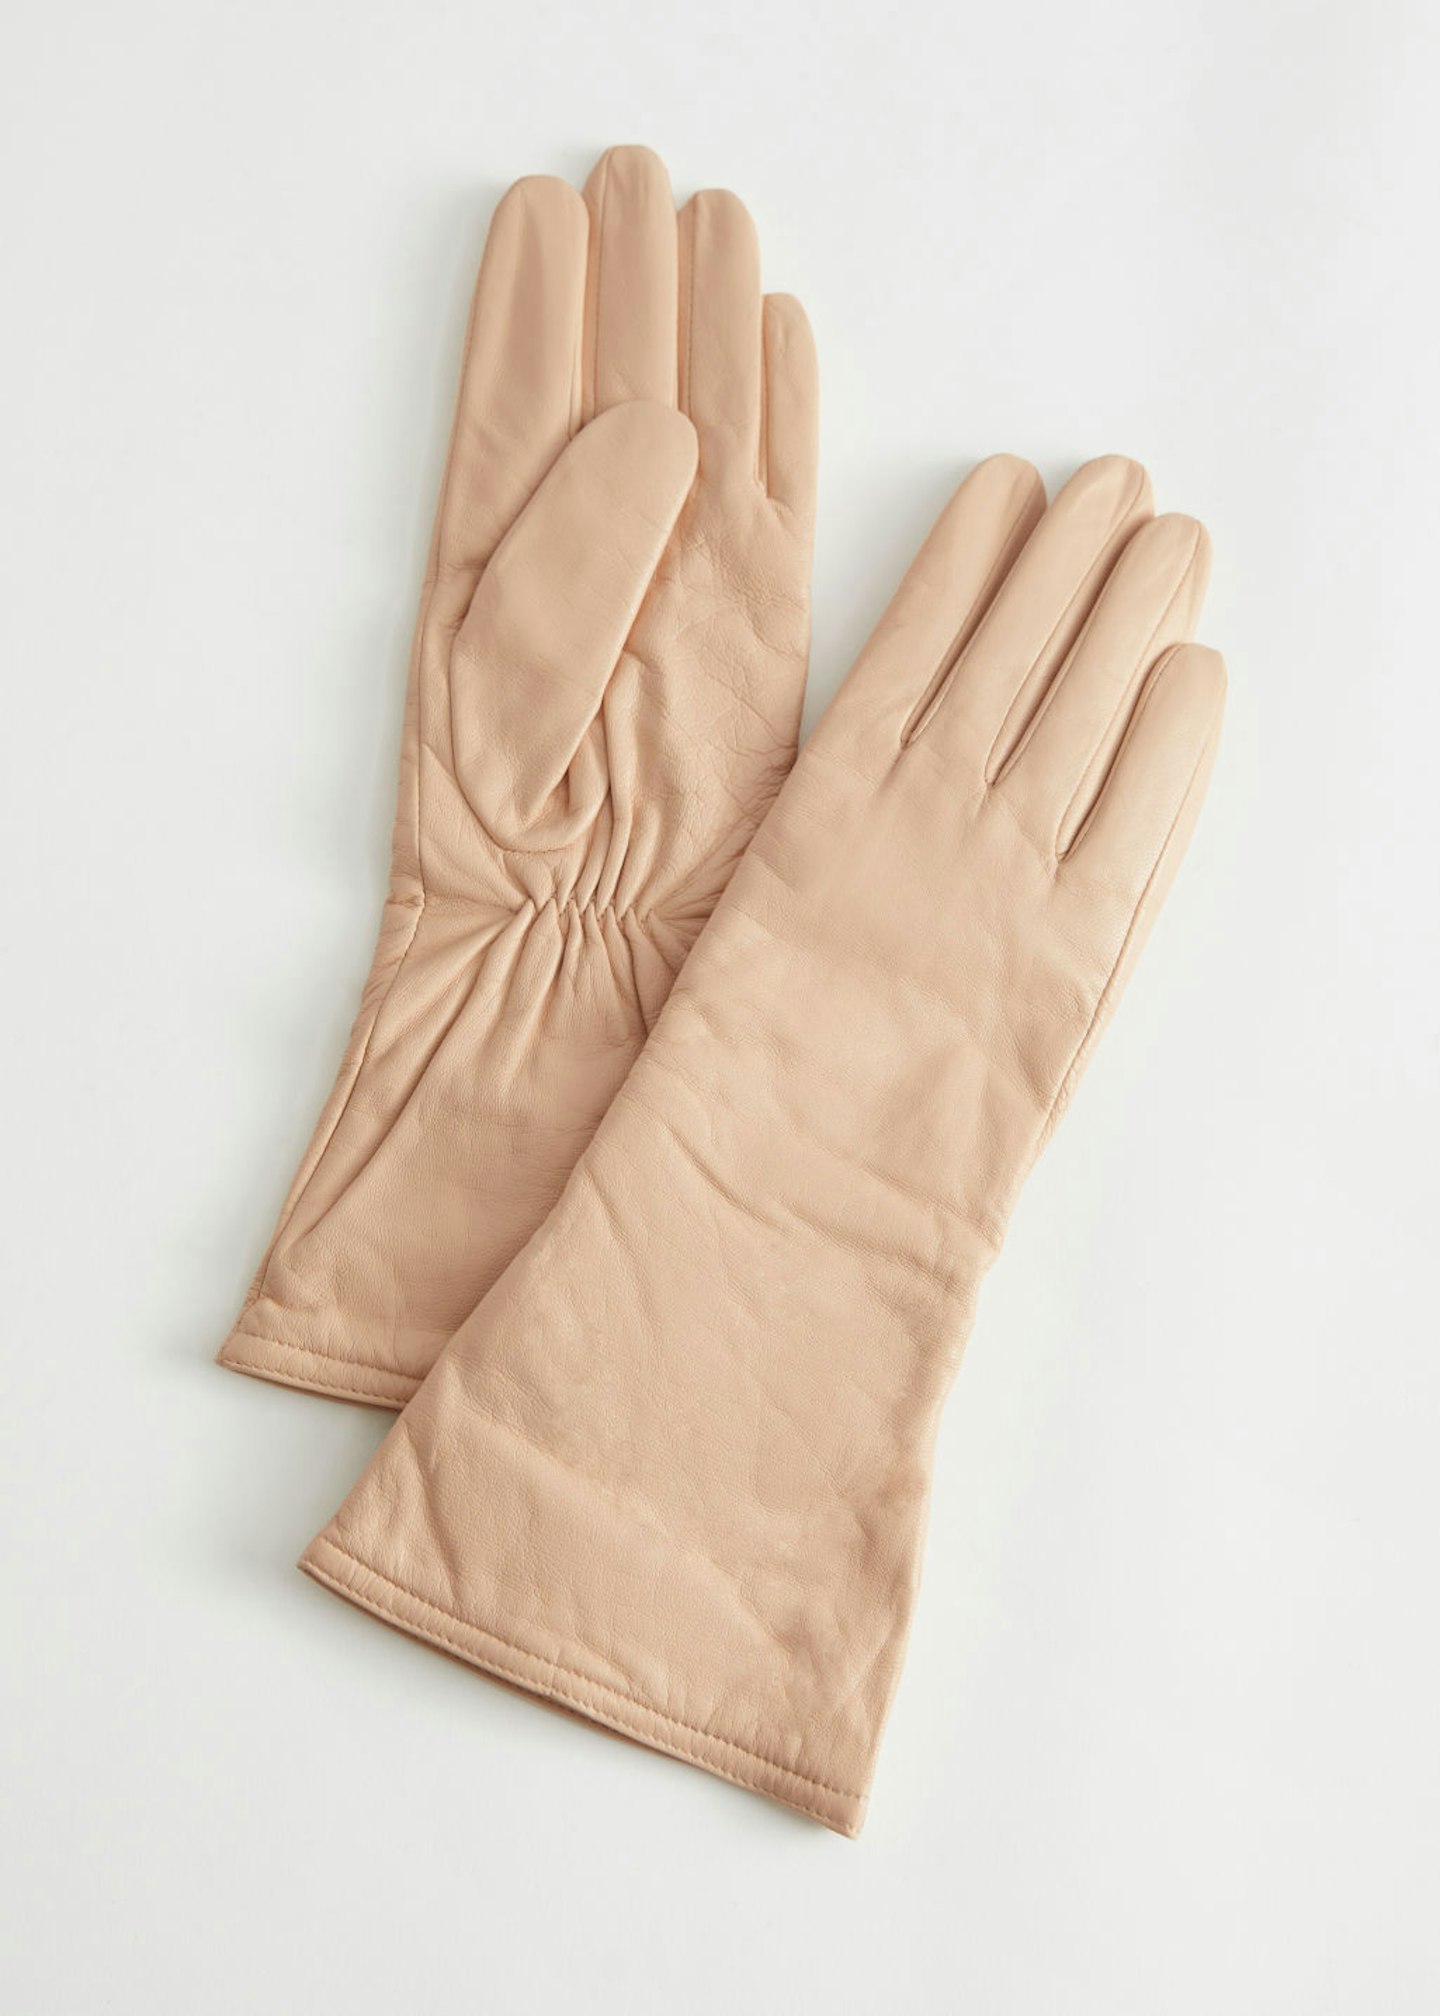 & Other Stories, Fitted Leather Gloves, £55